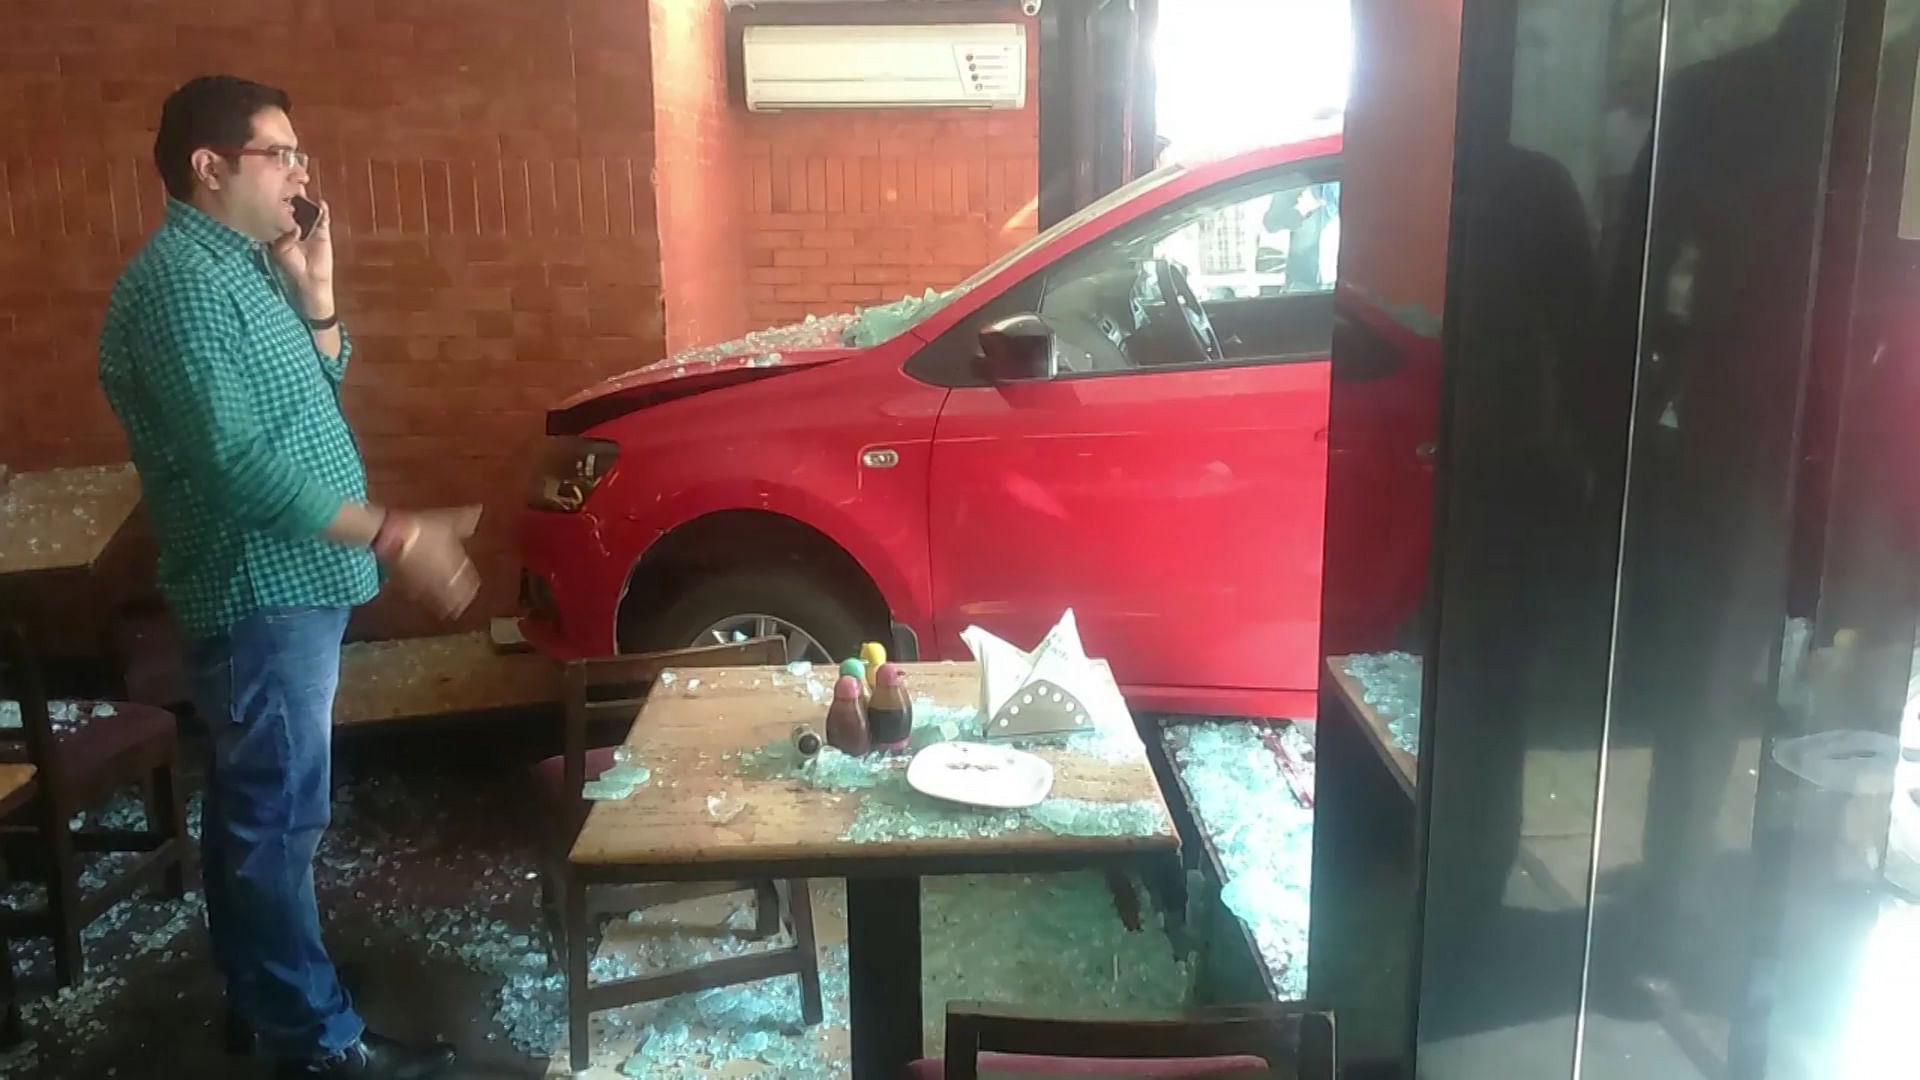 The crashed car inside the damaged restaurant in Ranchi. (Photo: AP/Caters TV screengrab)